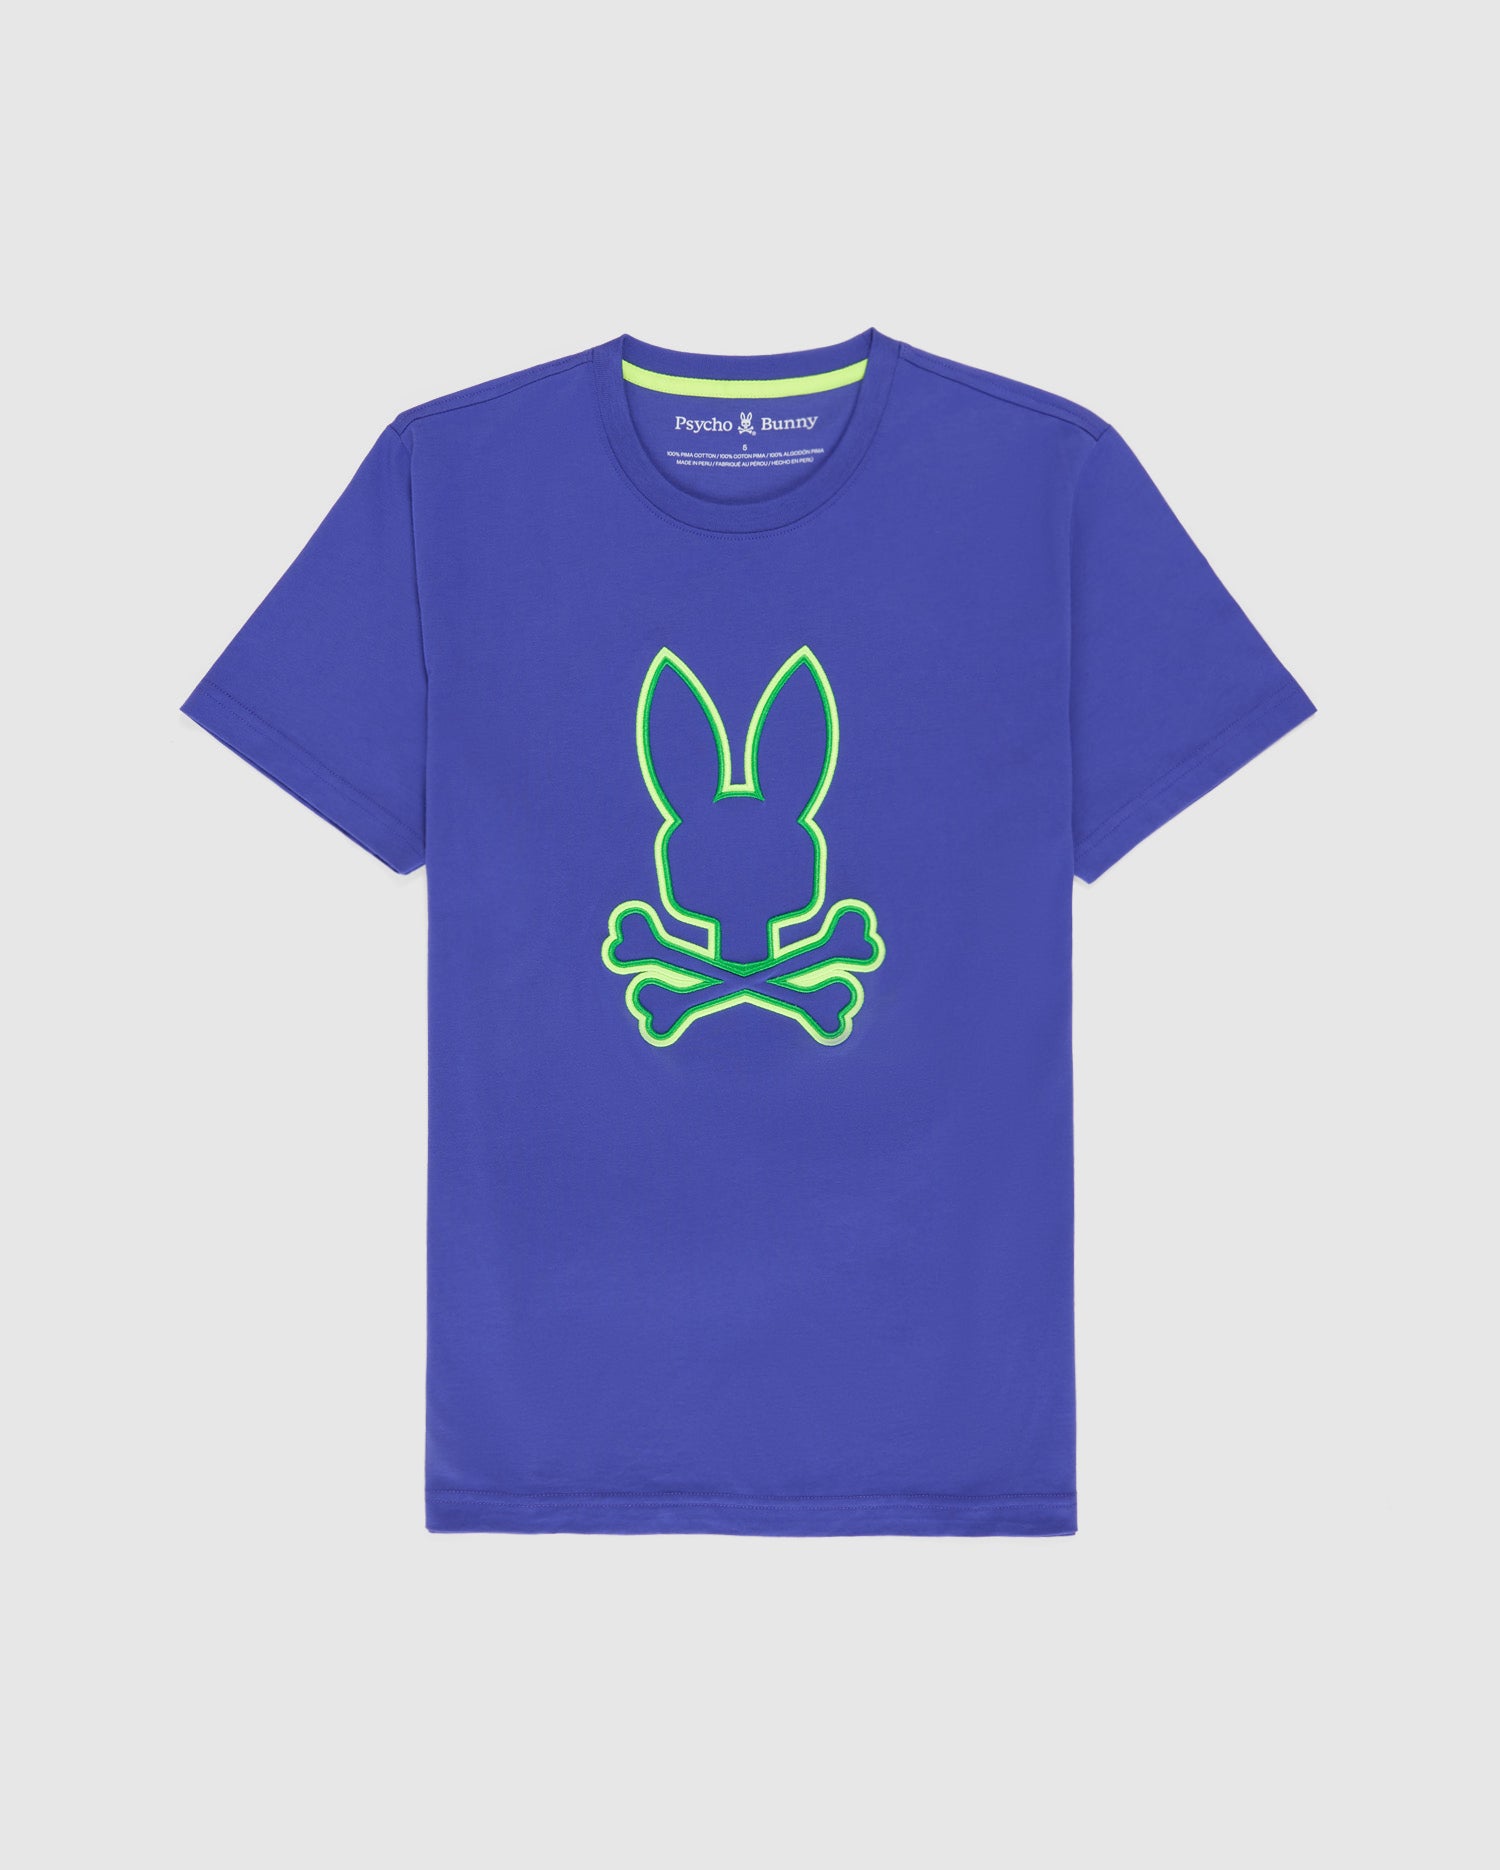 A blue Pima cotton t-shirt featuring a neon green outline of a bunny head with crossed bones beneath it on the front. The neckline has a printed tag that reads 